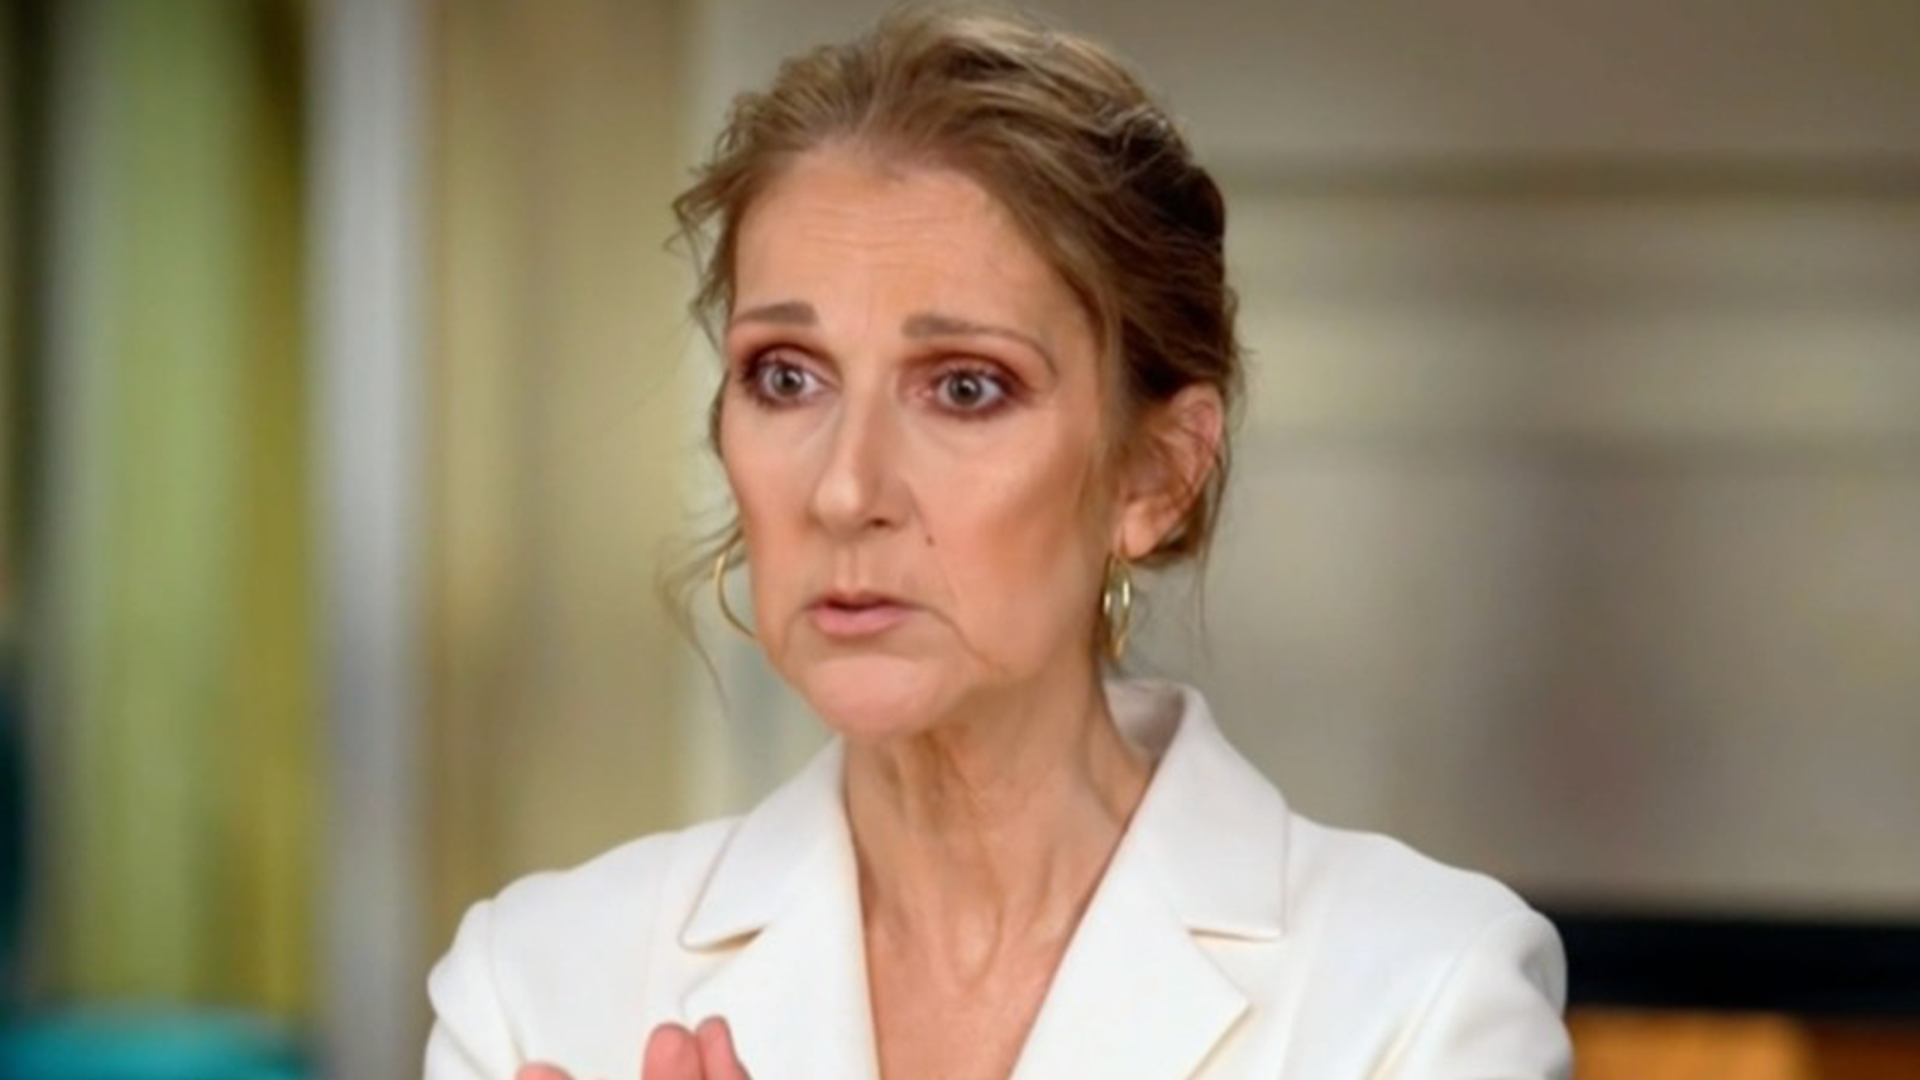 Celine Dion admits she was unaware medication could ‘kill’ her as iconic singer battled unknown illness during tour [Video]